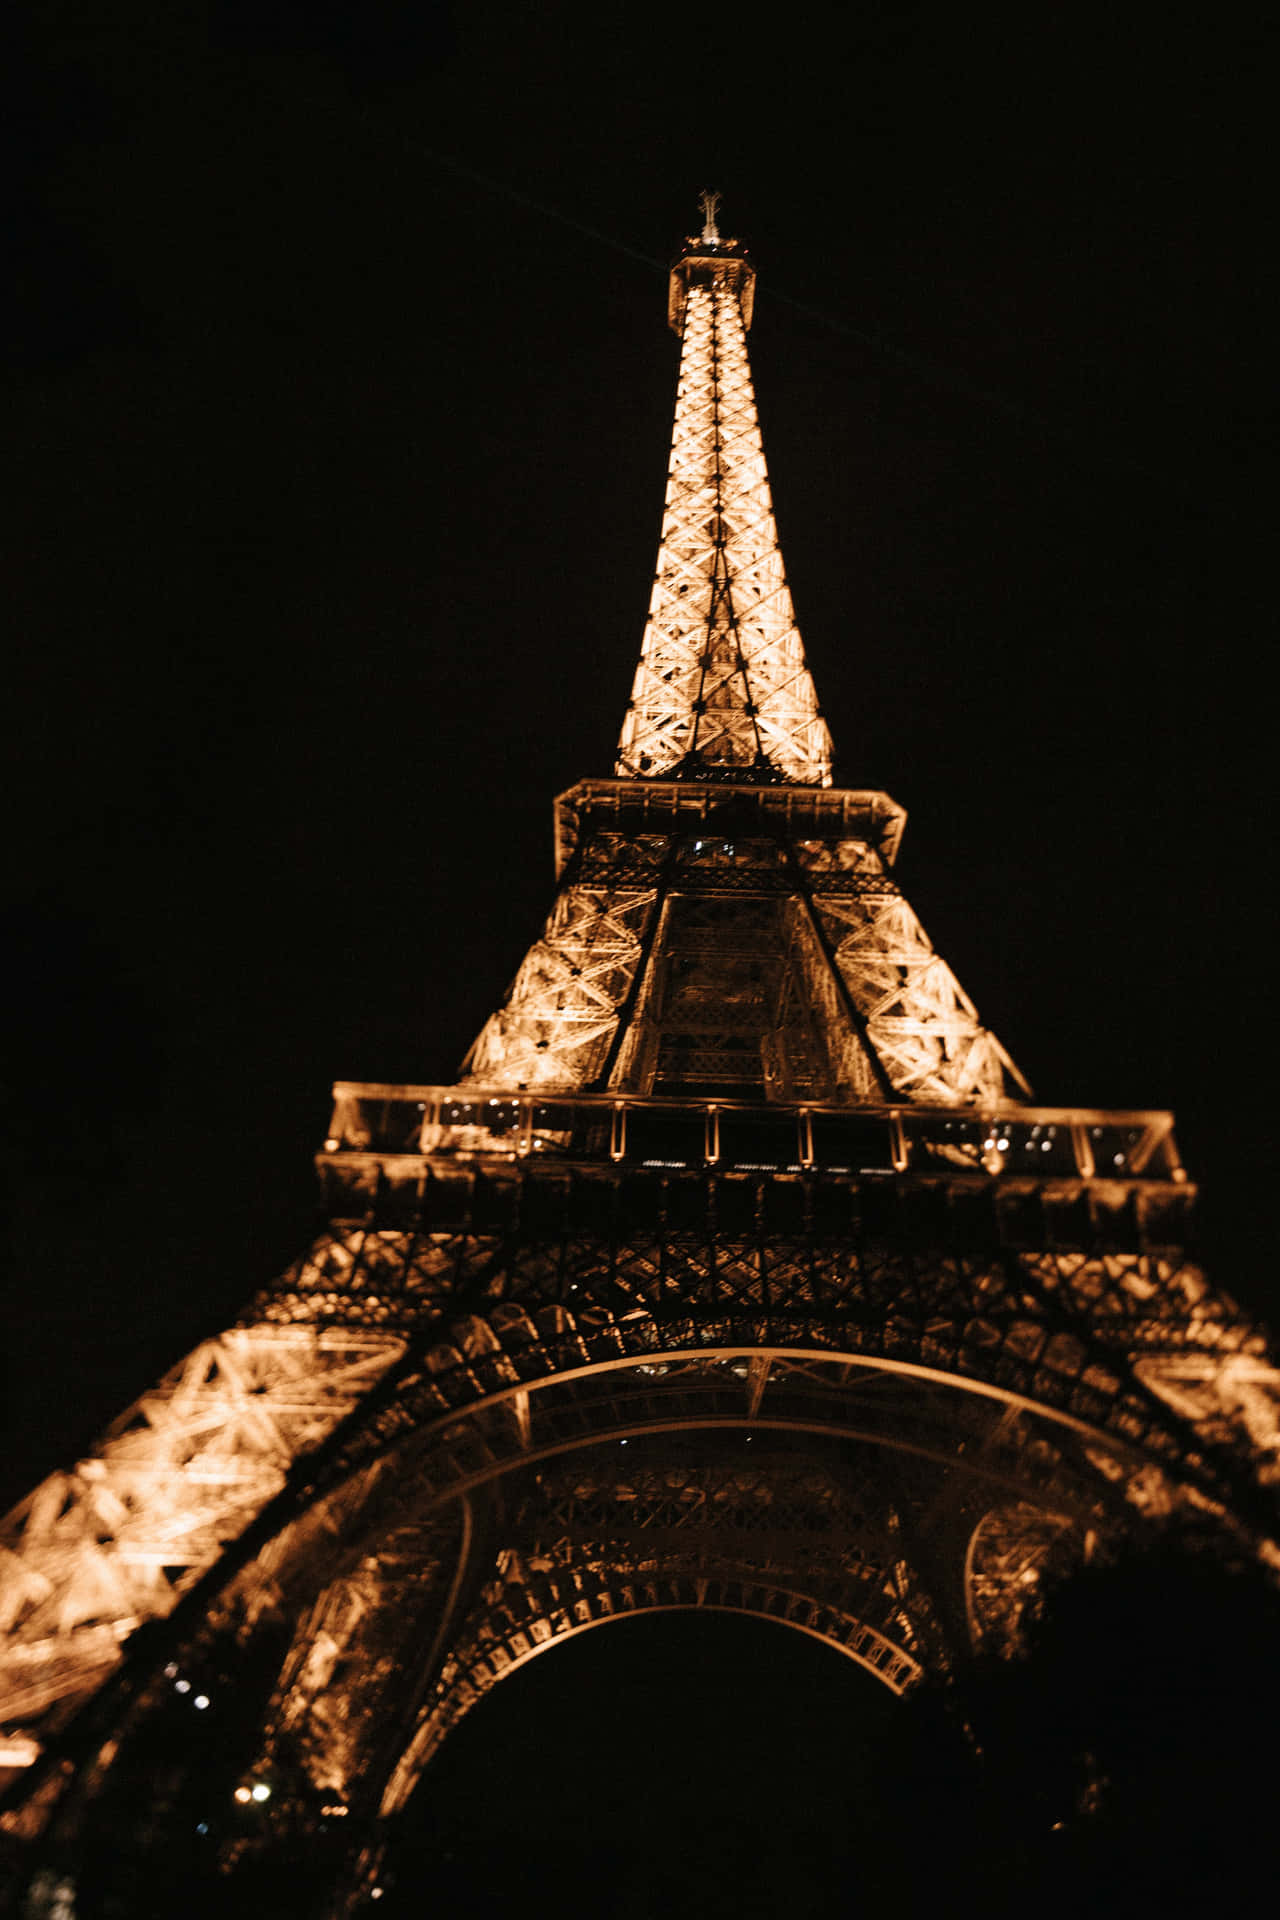 “the City Of Lights Shines Even Brighter At Night.”